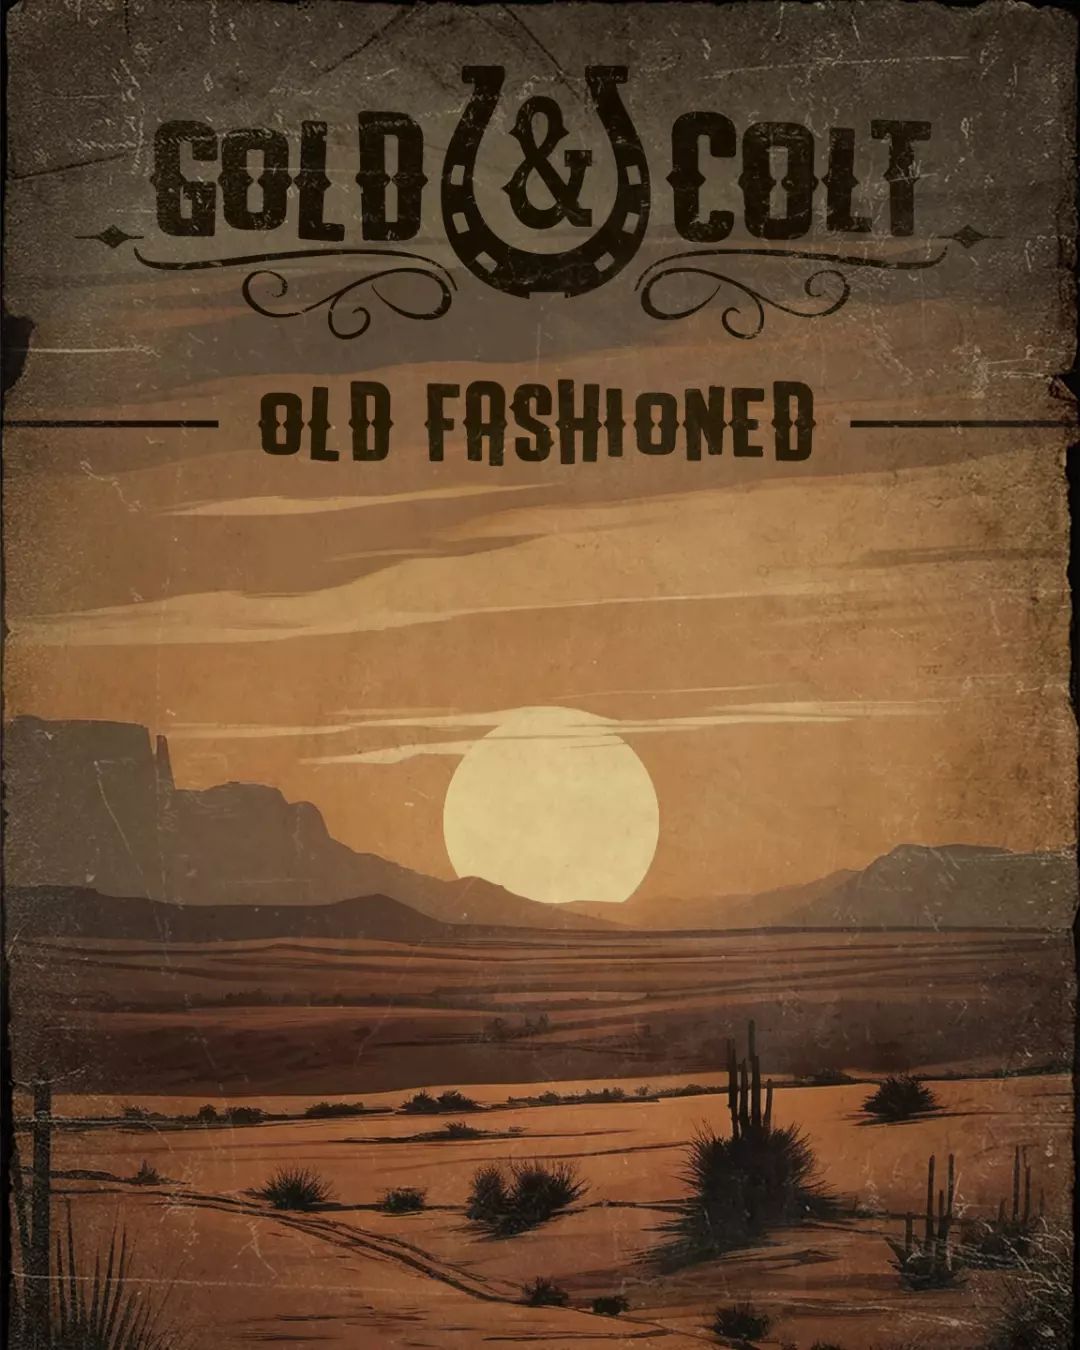 Gold & Colt publican "Old Fashioned"